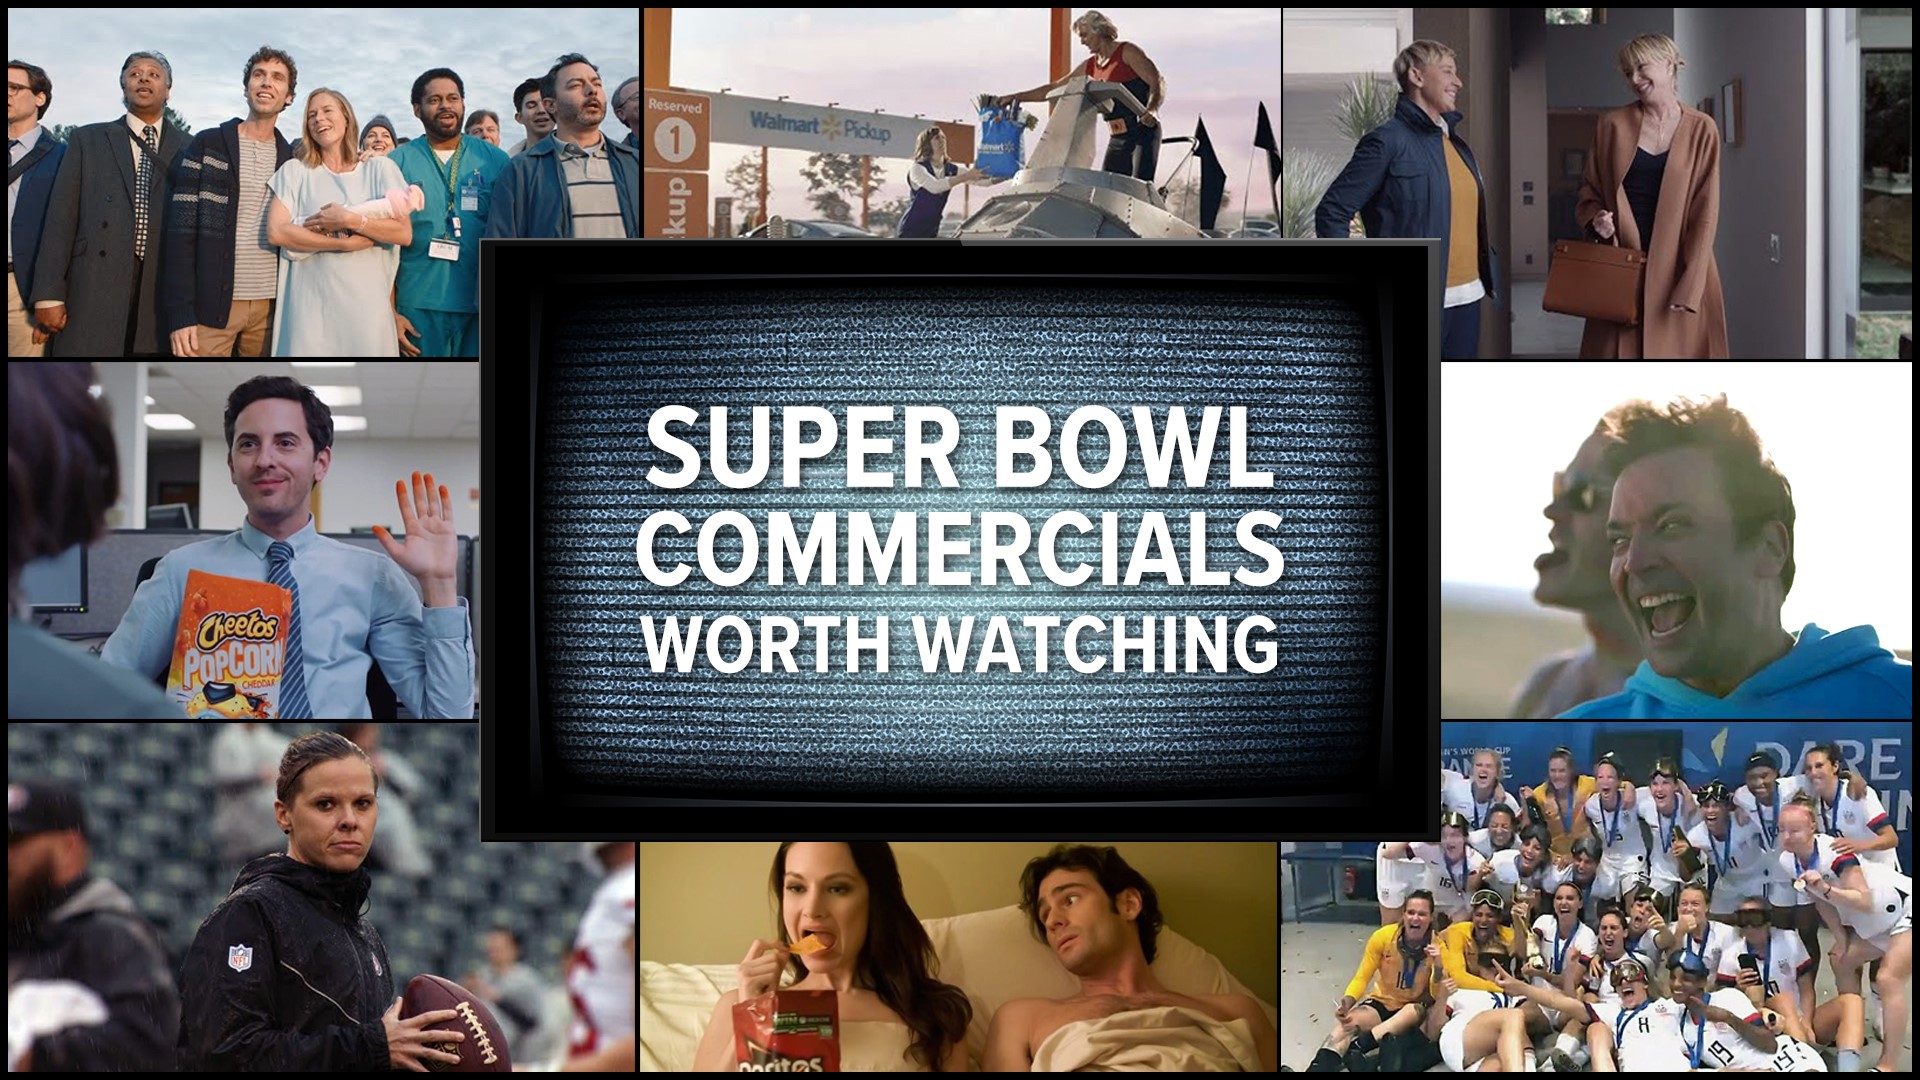 Is the cost of Super Bowl commercials worth it? VERIFY